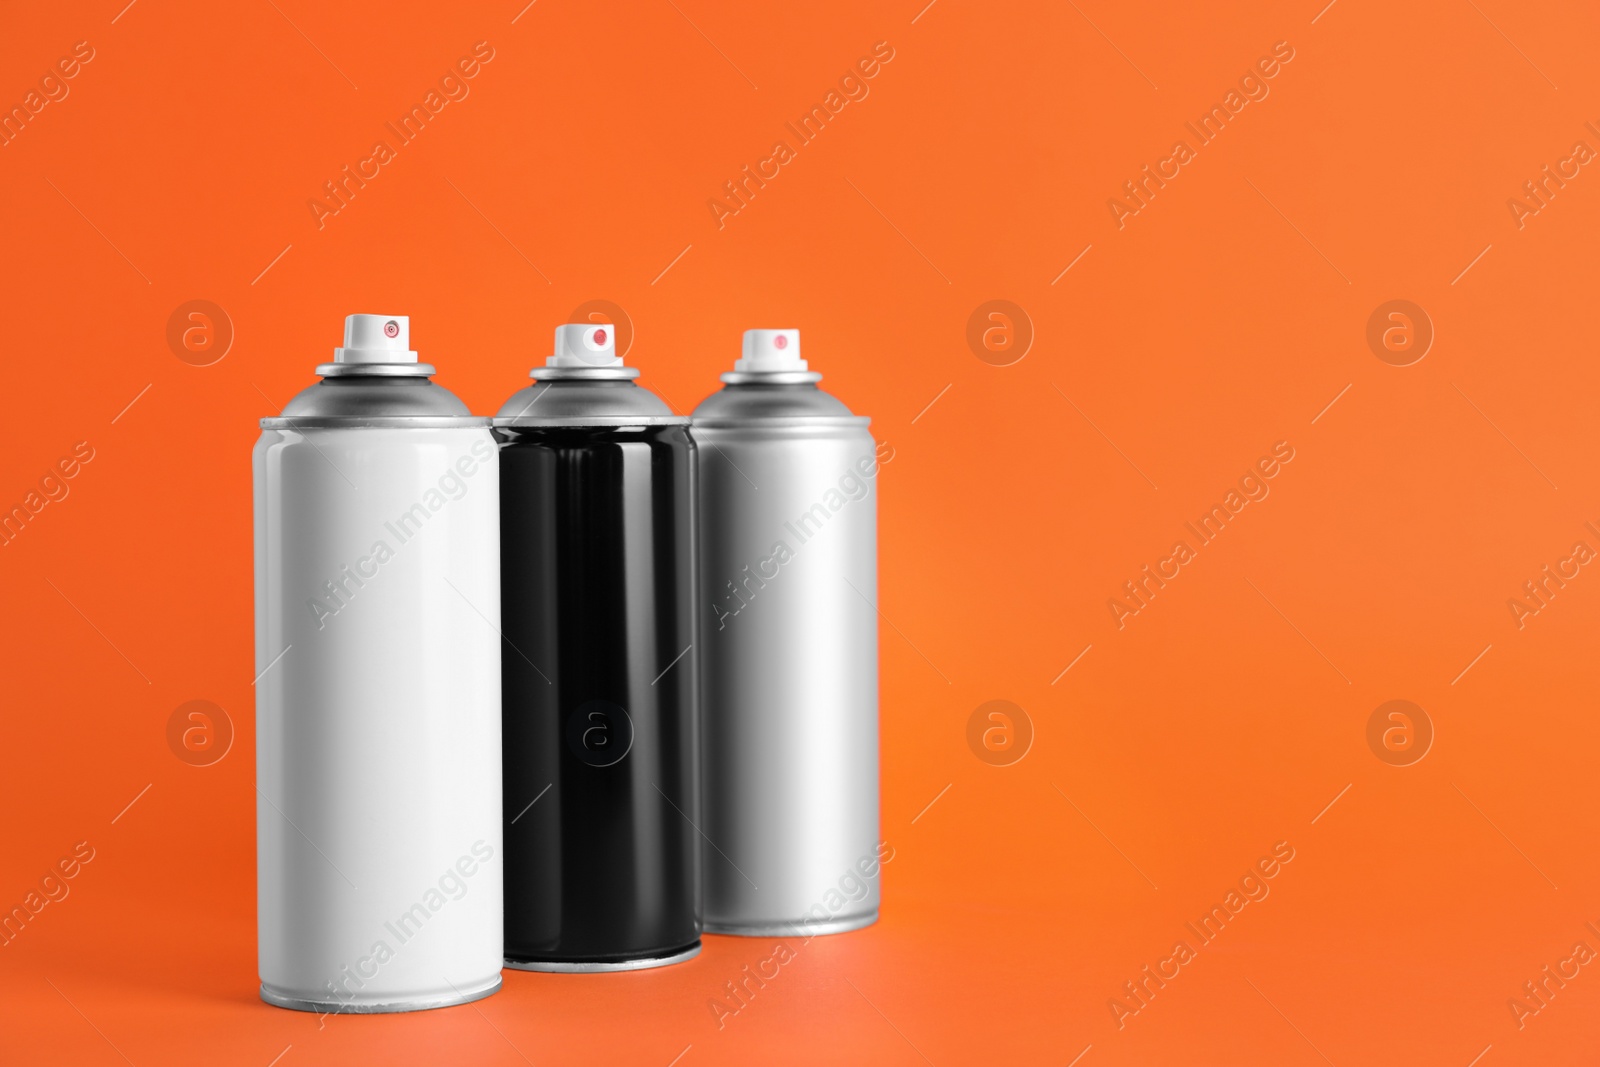 Photo of Cans of spray paints on orange background. Space for text